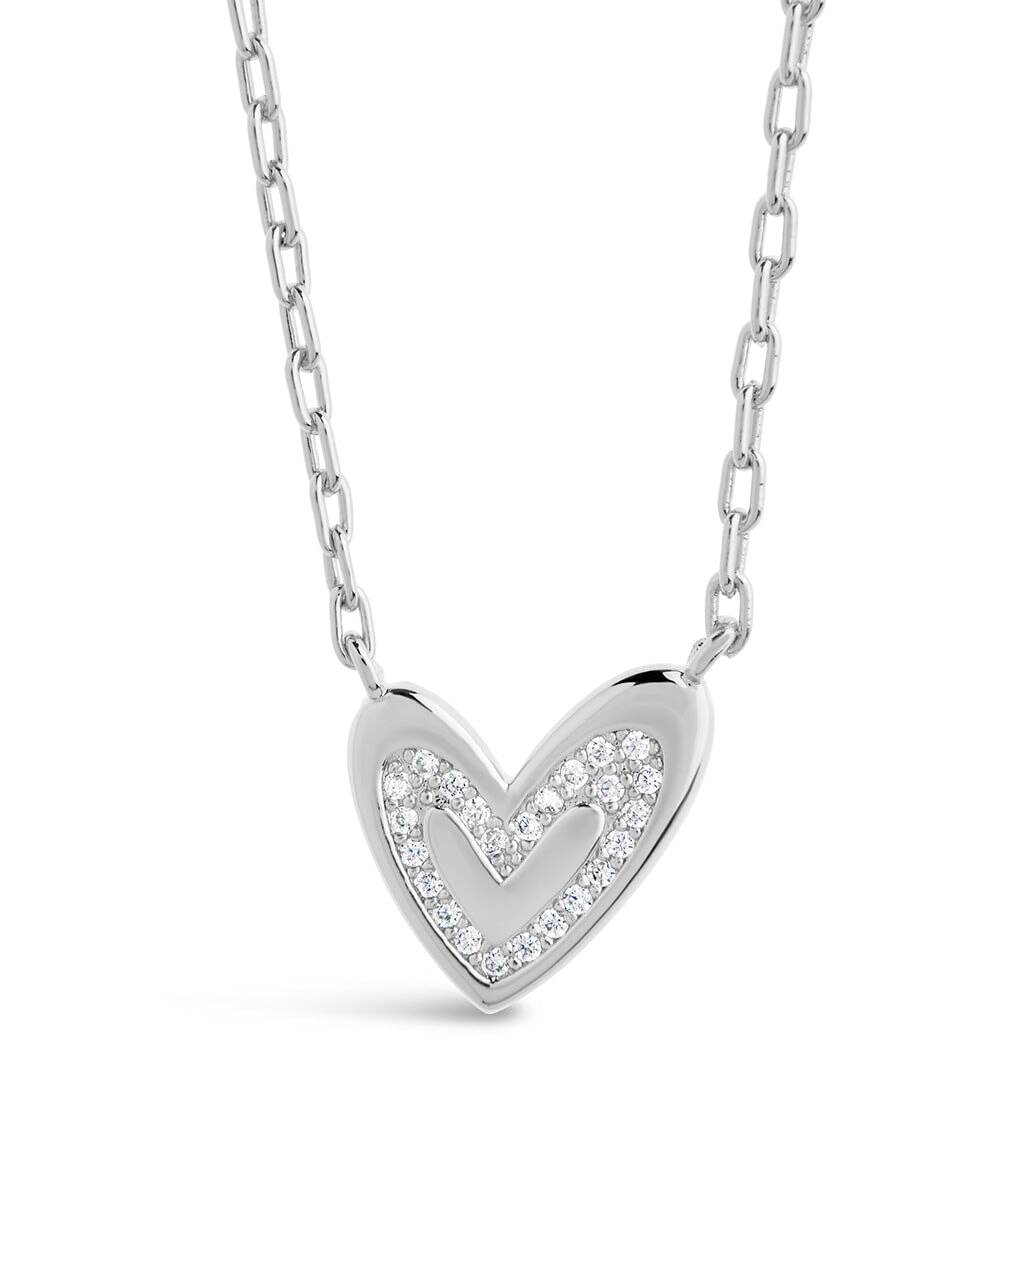 Mabel CZ Heart Pendant Necklace Necklace Sterling Forever Silver 